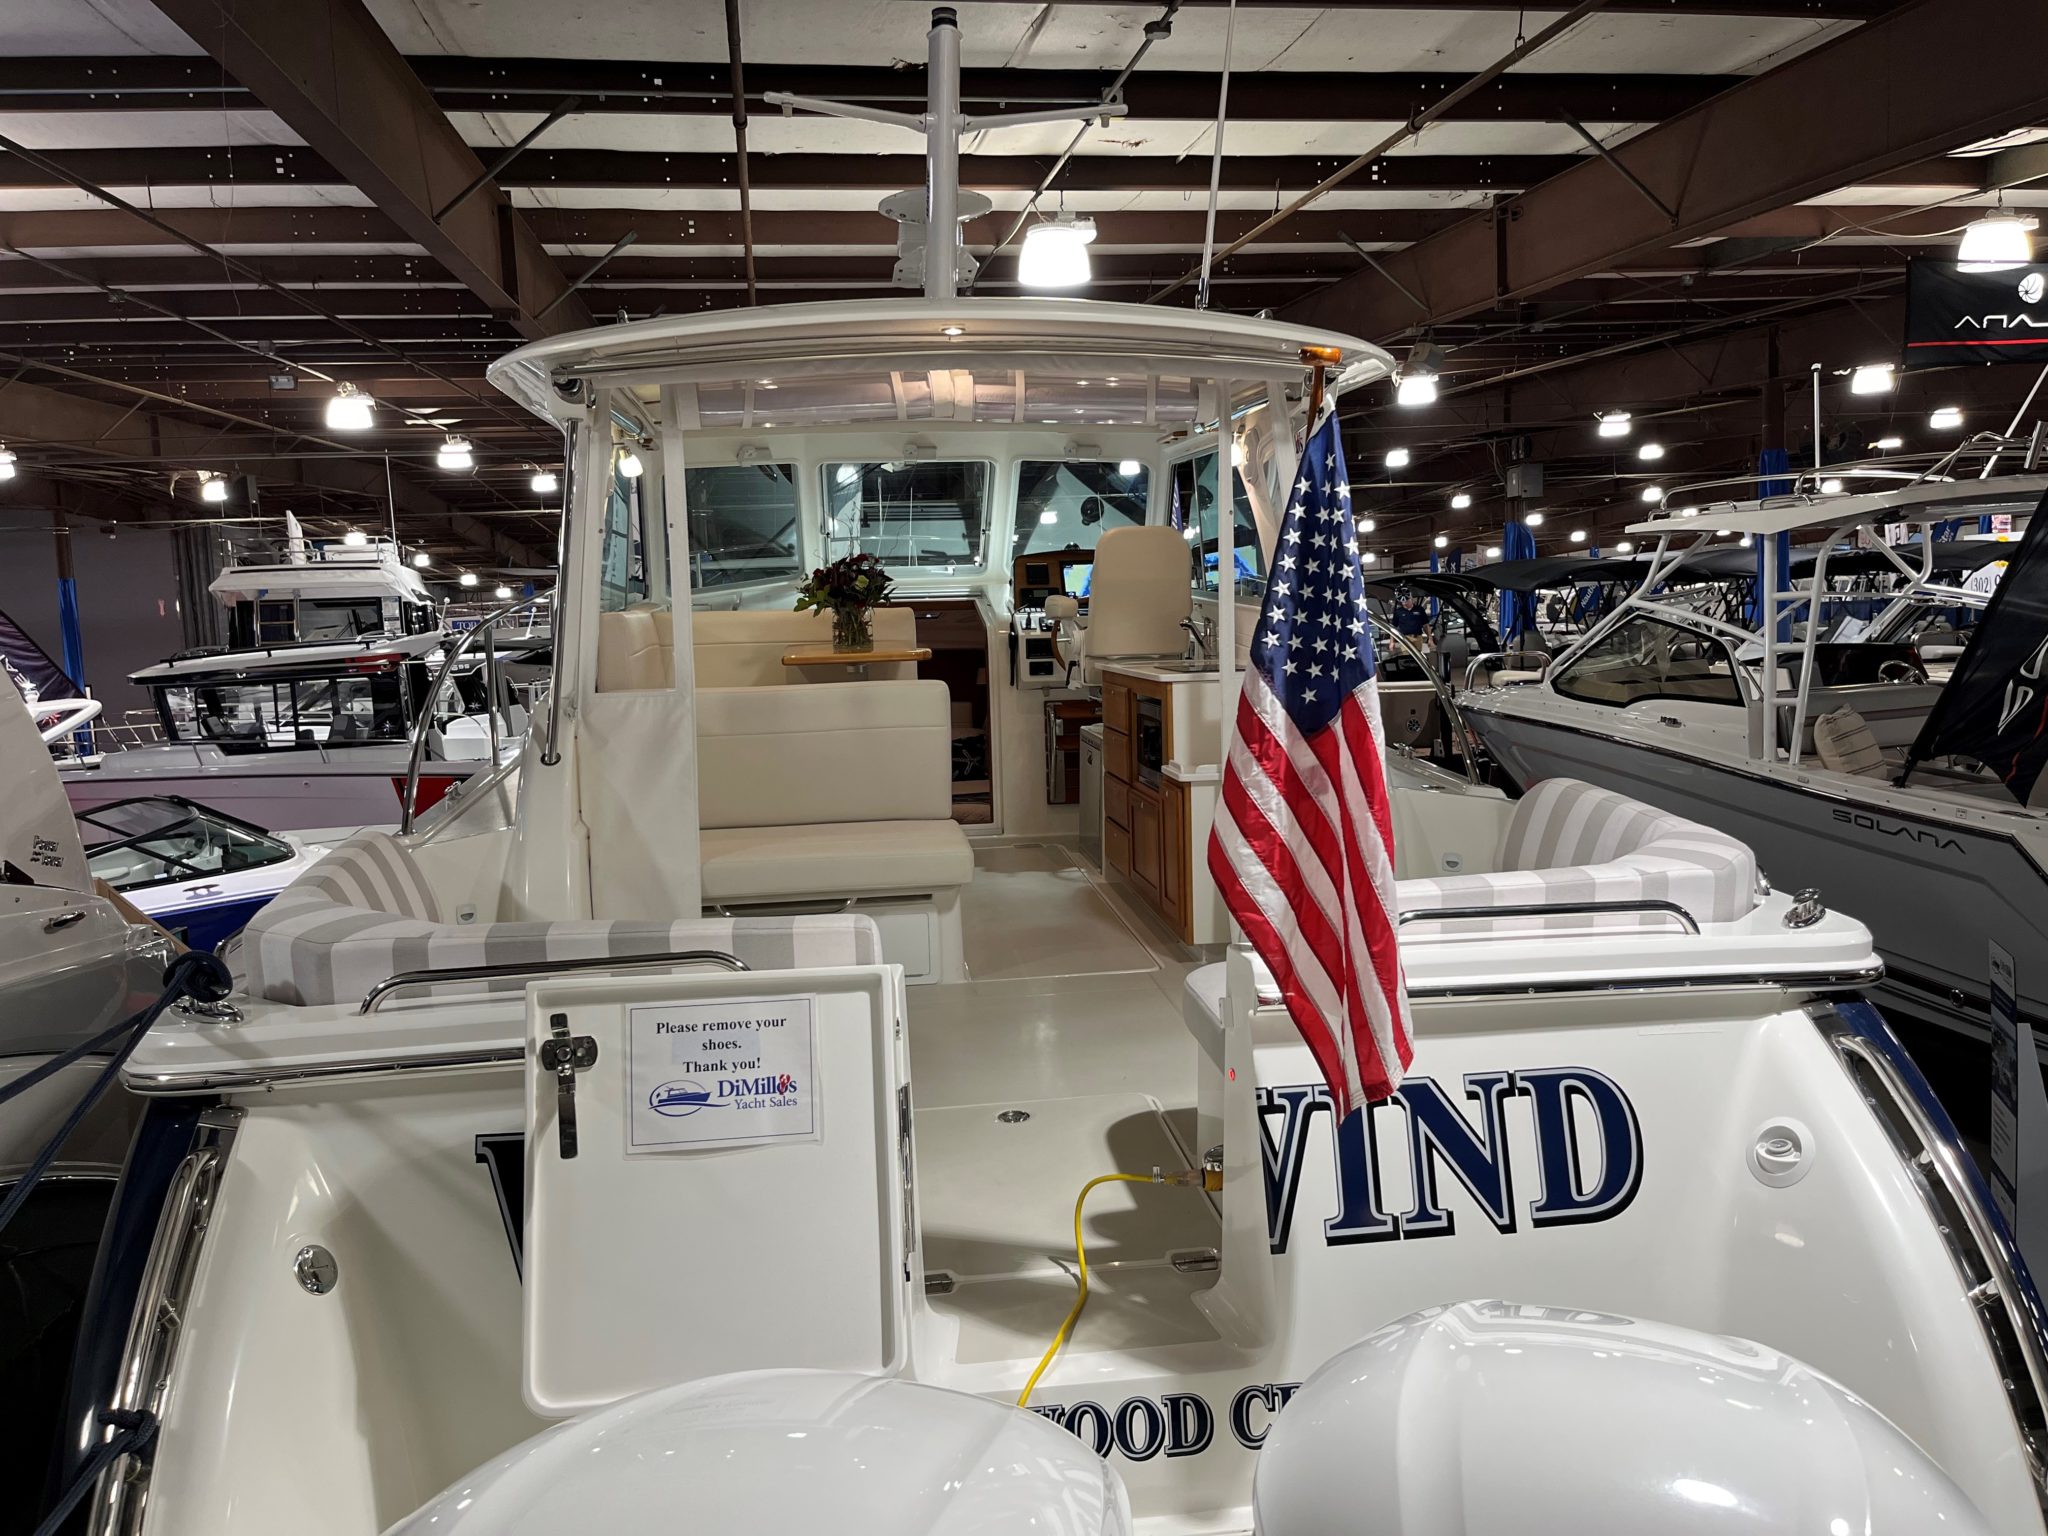 Chesapeake Bay Boat Show is OPEN! DiMillo's Yacht Sales